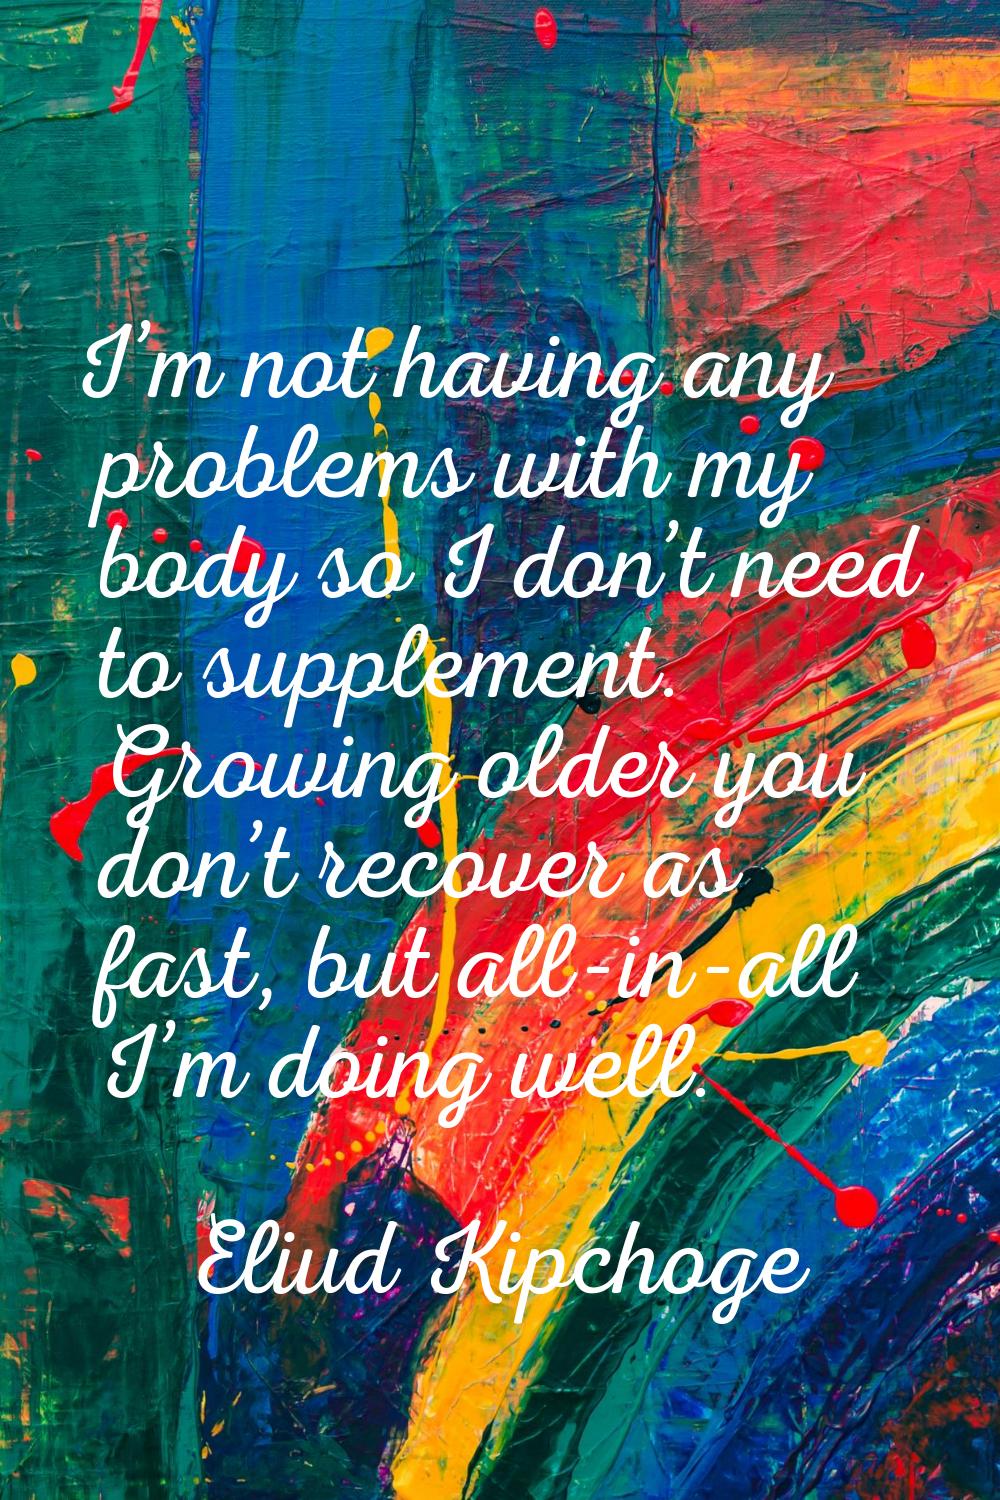 I’m not having any problems with my body so I don’t need to supplement. Growing older you don’t rec